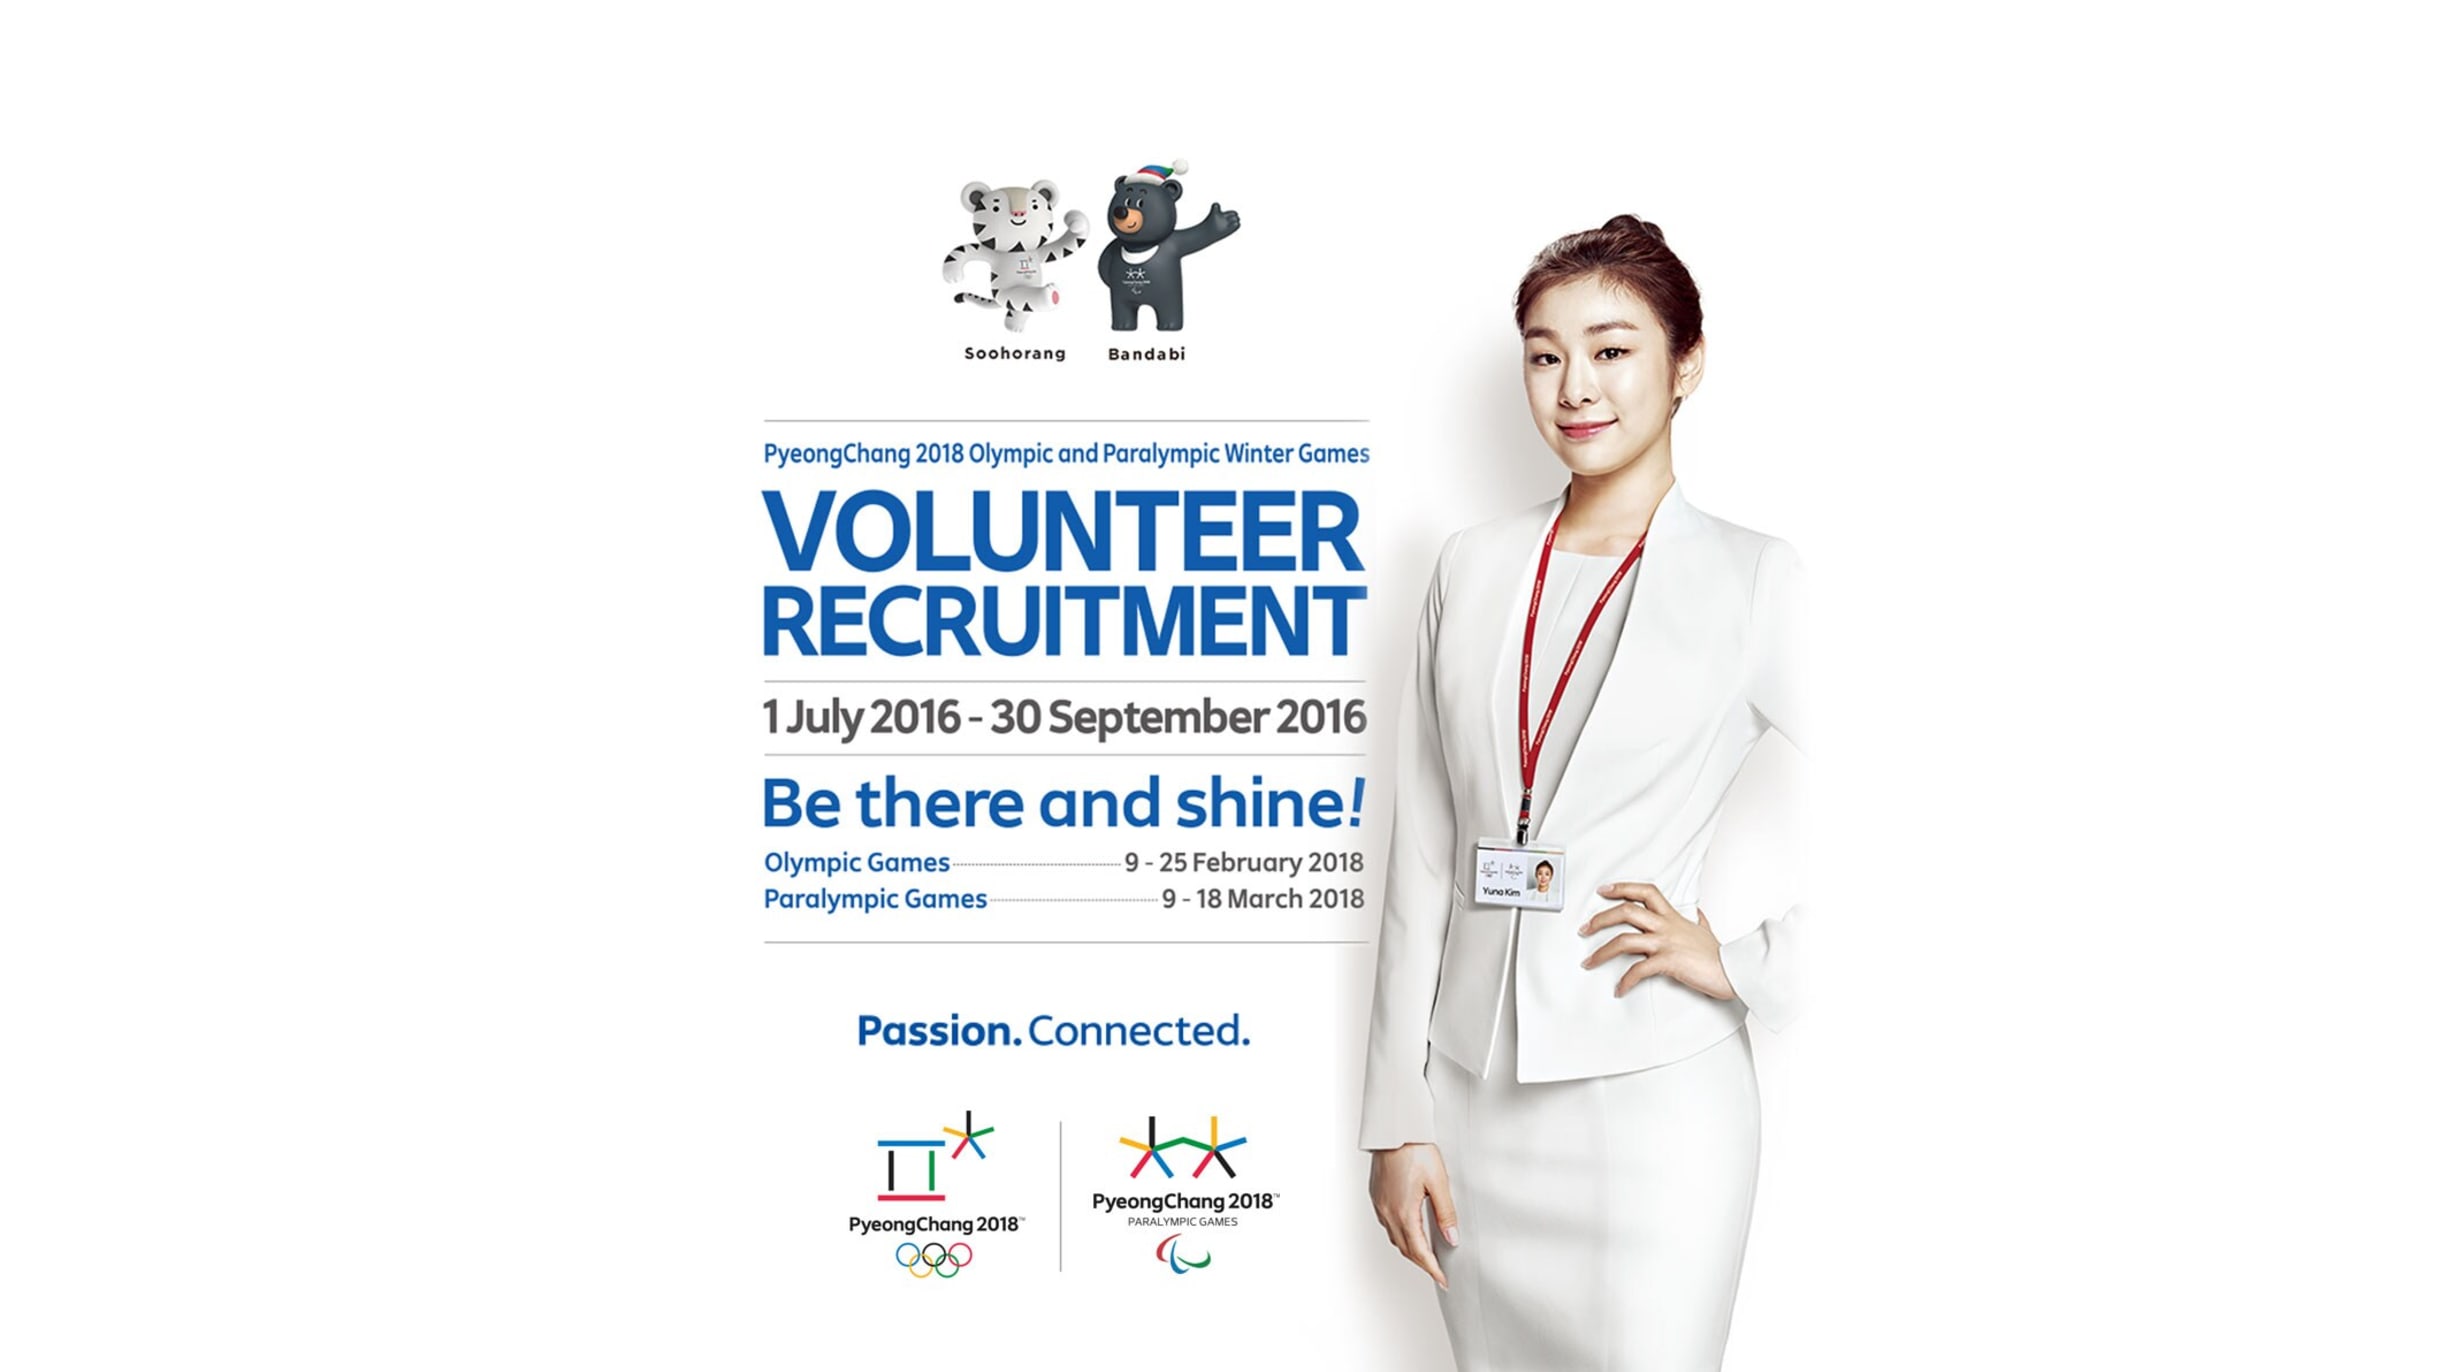 PyeongChang receives worldwide response to call for volunteers